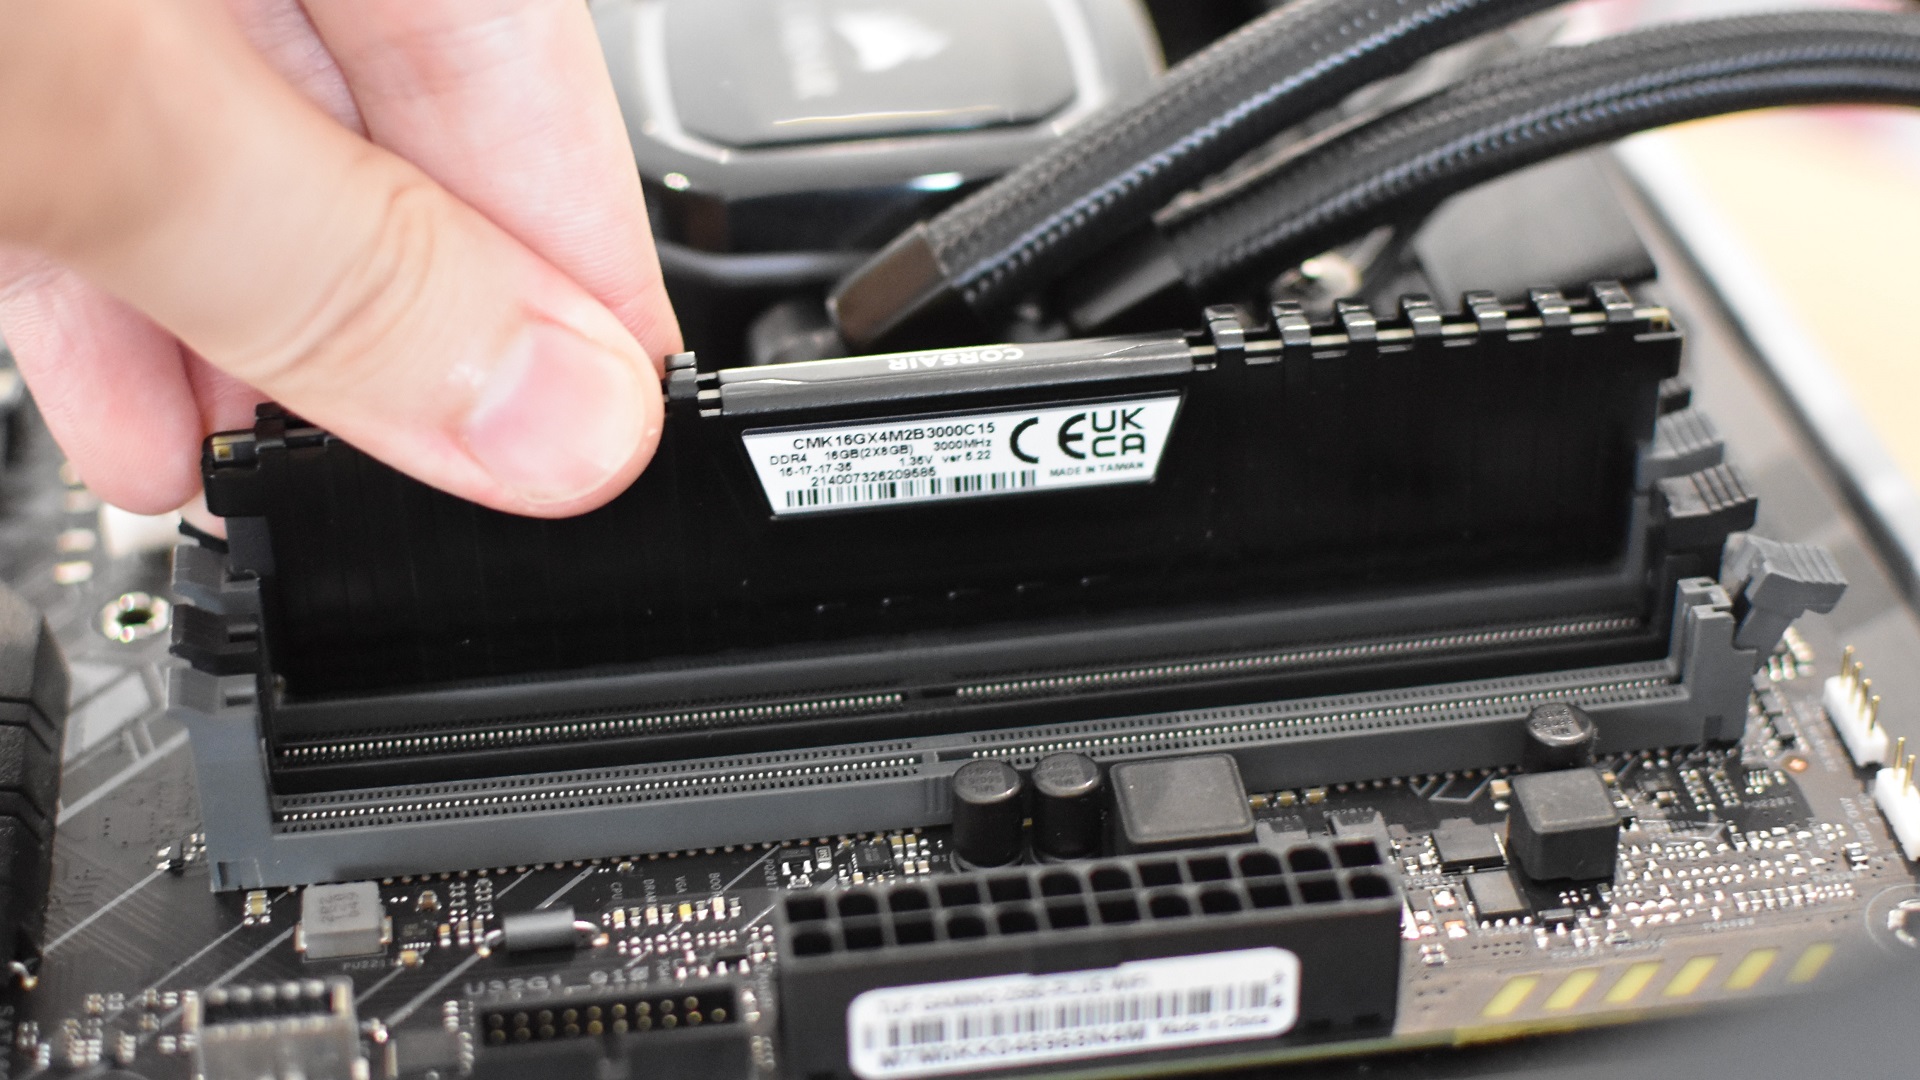 Step 3 of how to install RAM: push each RAM stick into the correct slot until the clip clicks back into place.